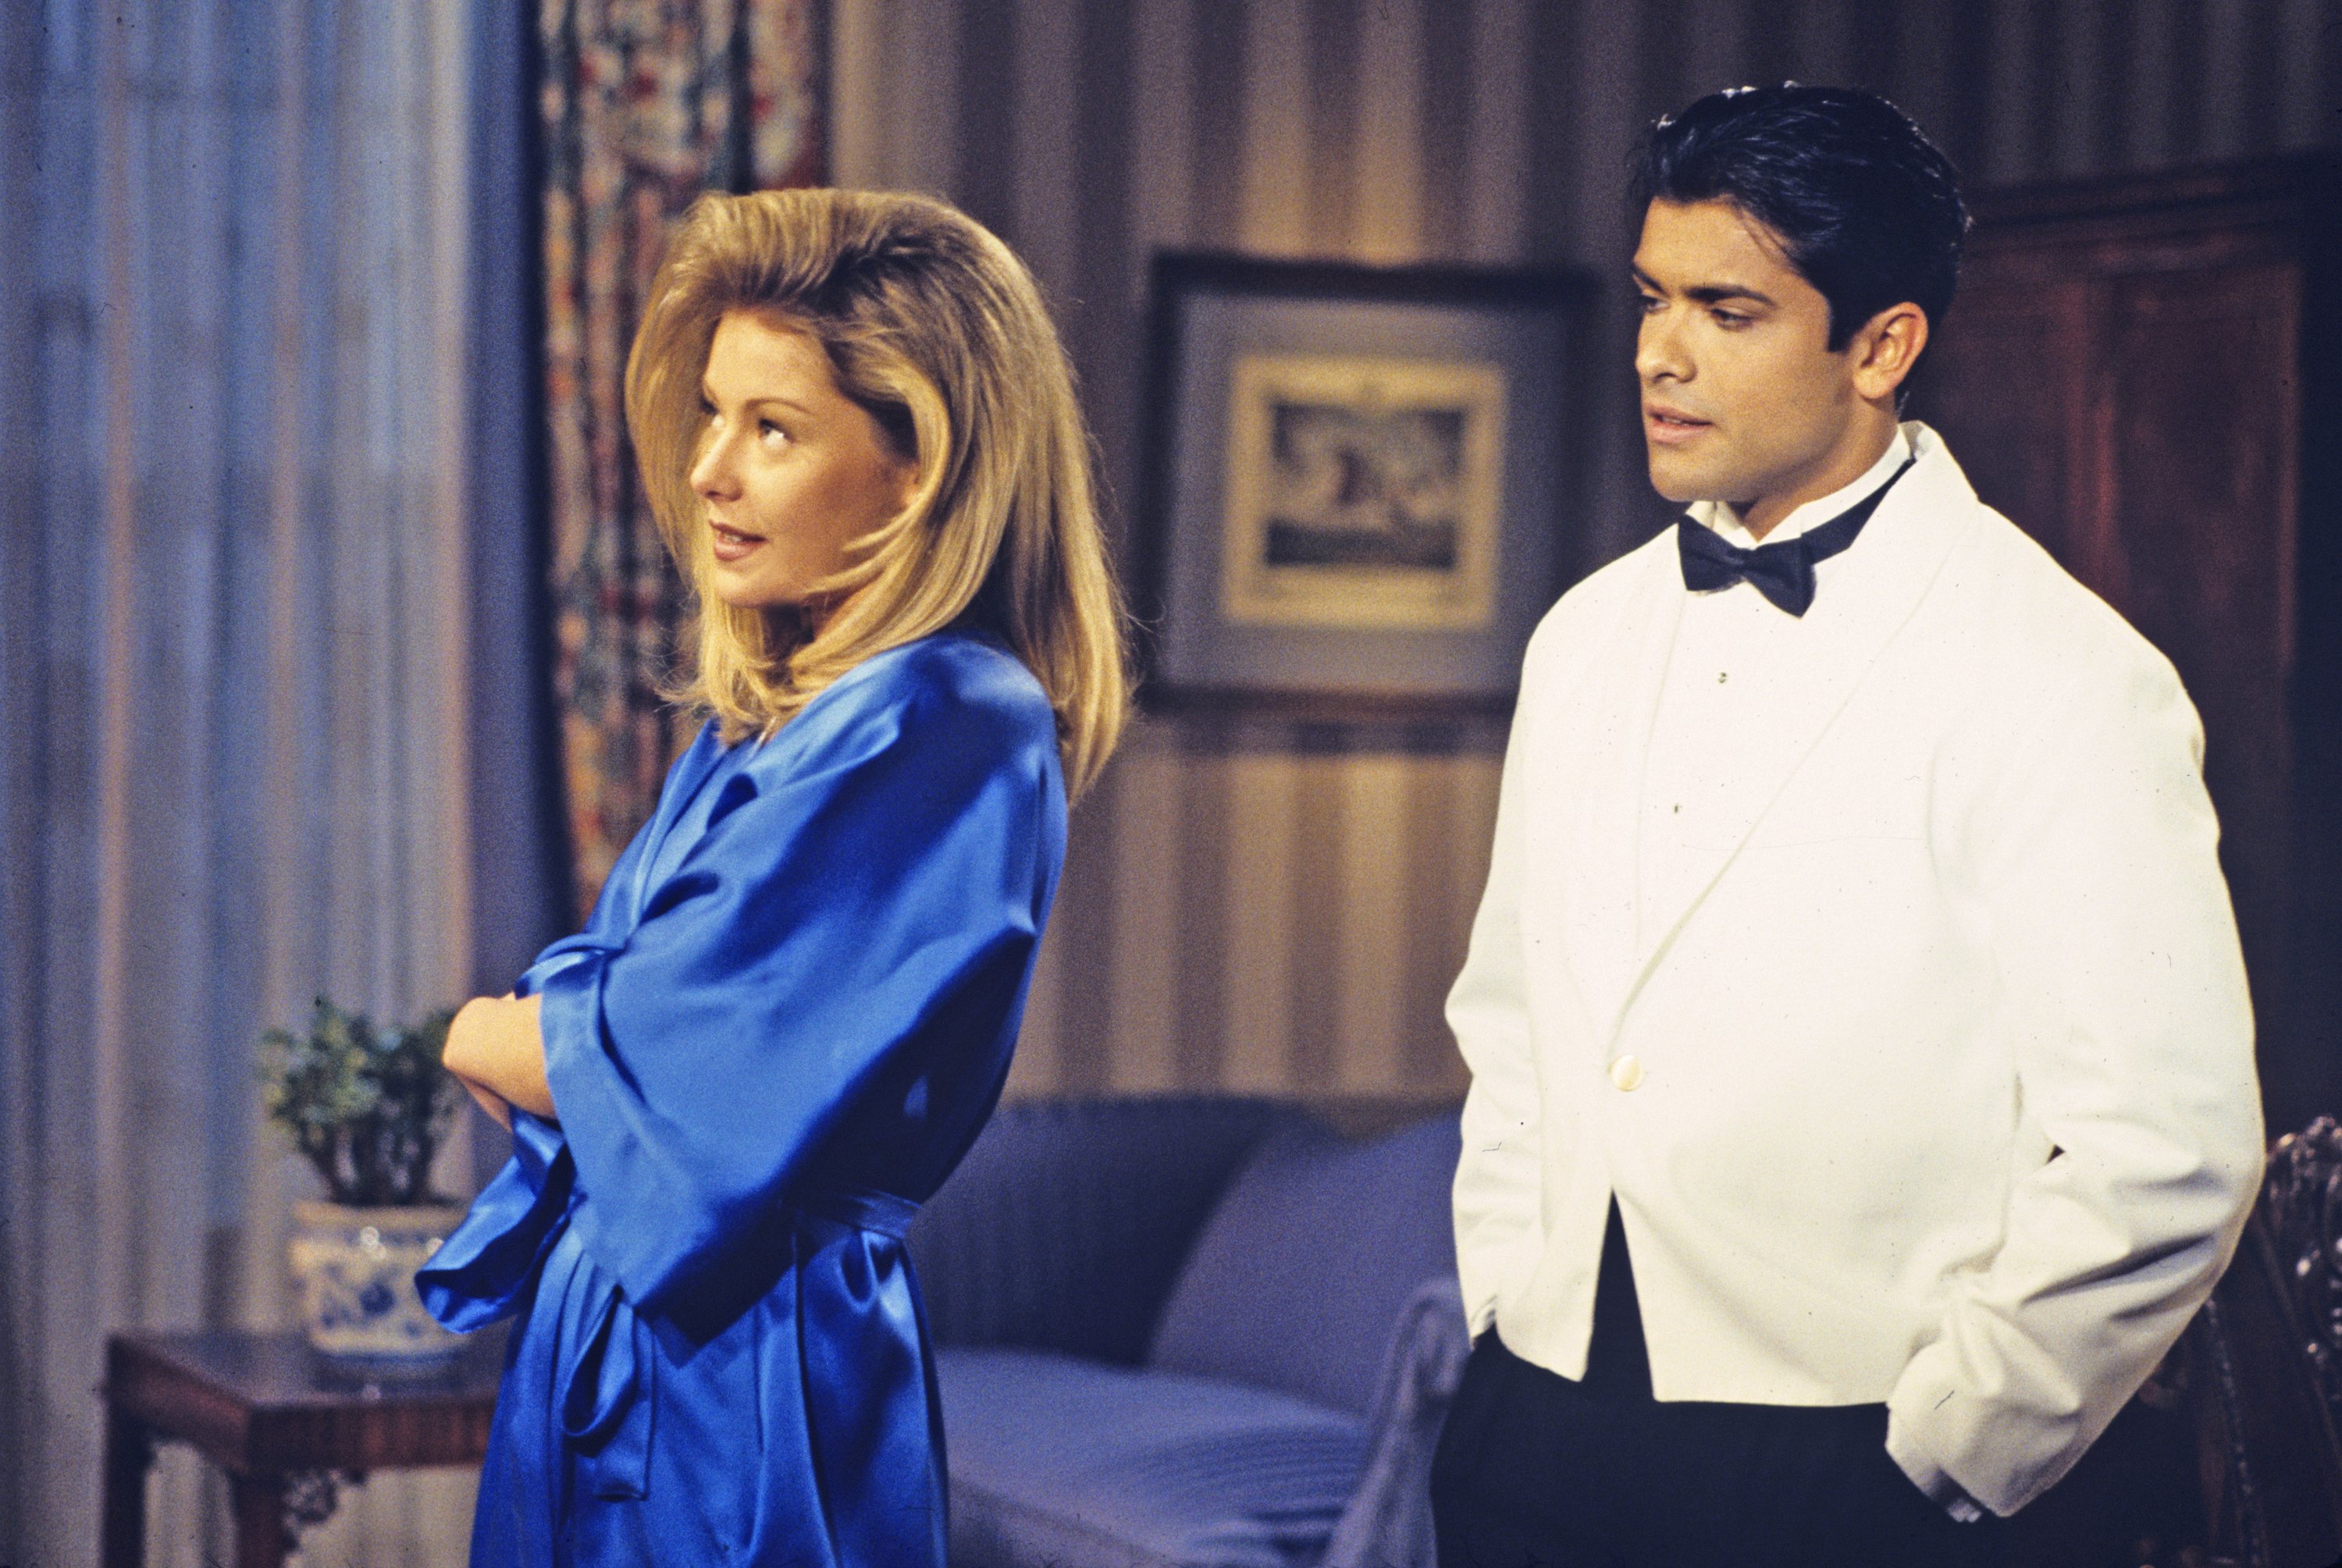 Kelly Ripa (Hayley) and Mark Consuelos (Mateo) in a scene on Walt Disney Television via Getty Images Daytime's "All My Children", in 1995. | Source: Getty Images